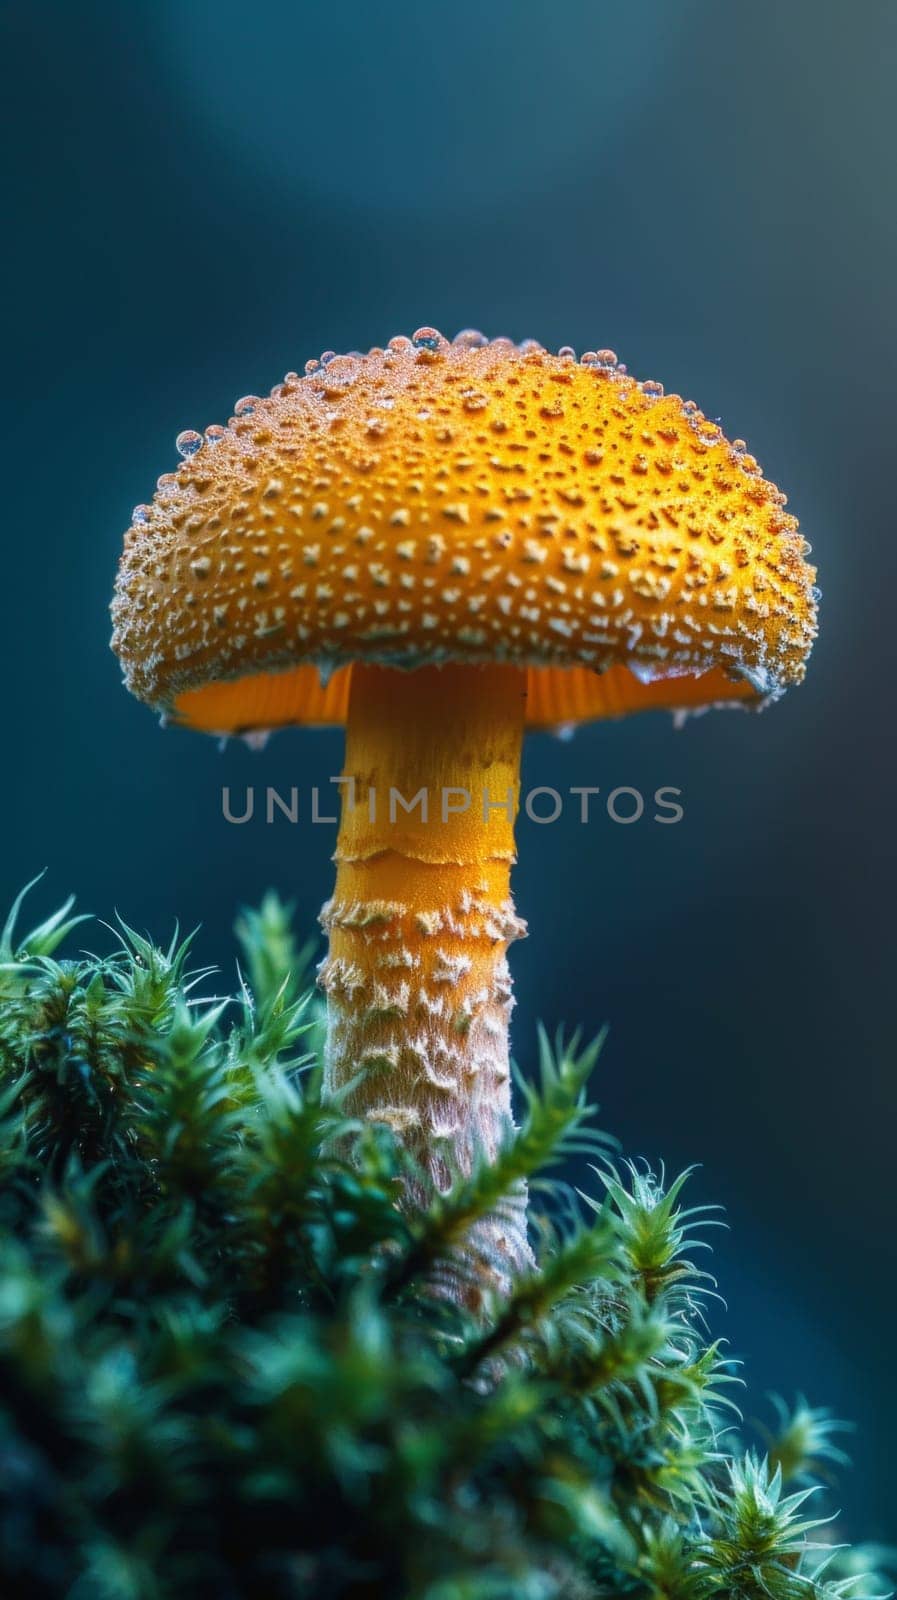 An orange mushroom with drops of water on it sitting in the grass